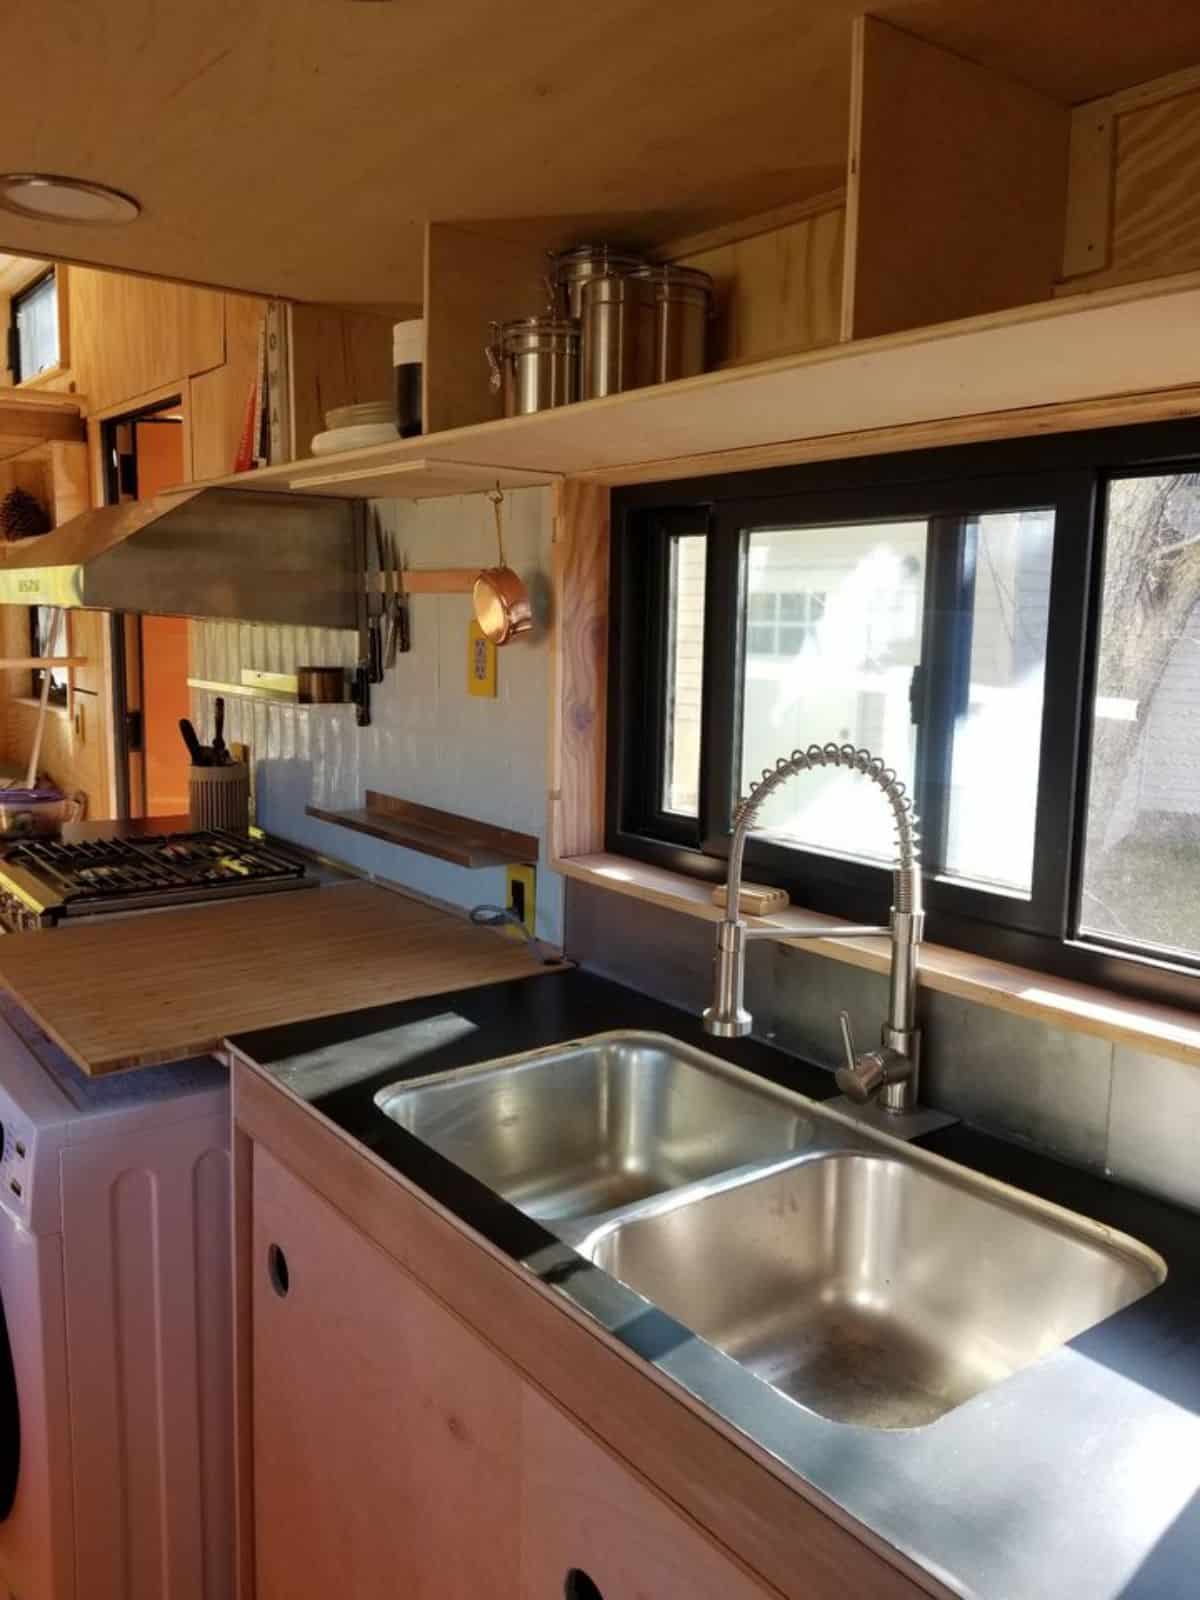 Kitchen area is well organized with burner, sink, storage cabinets